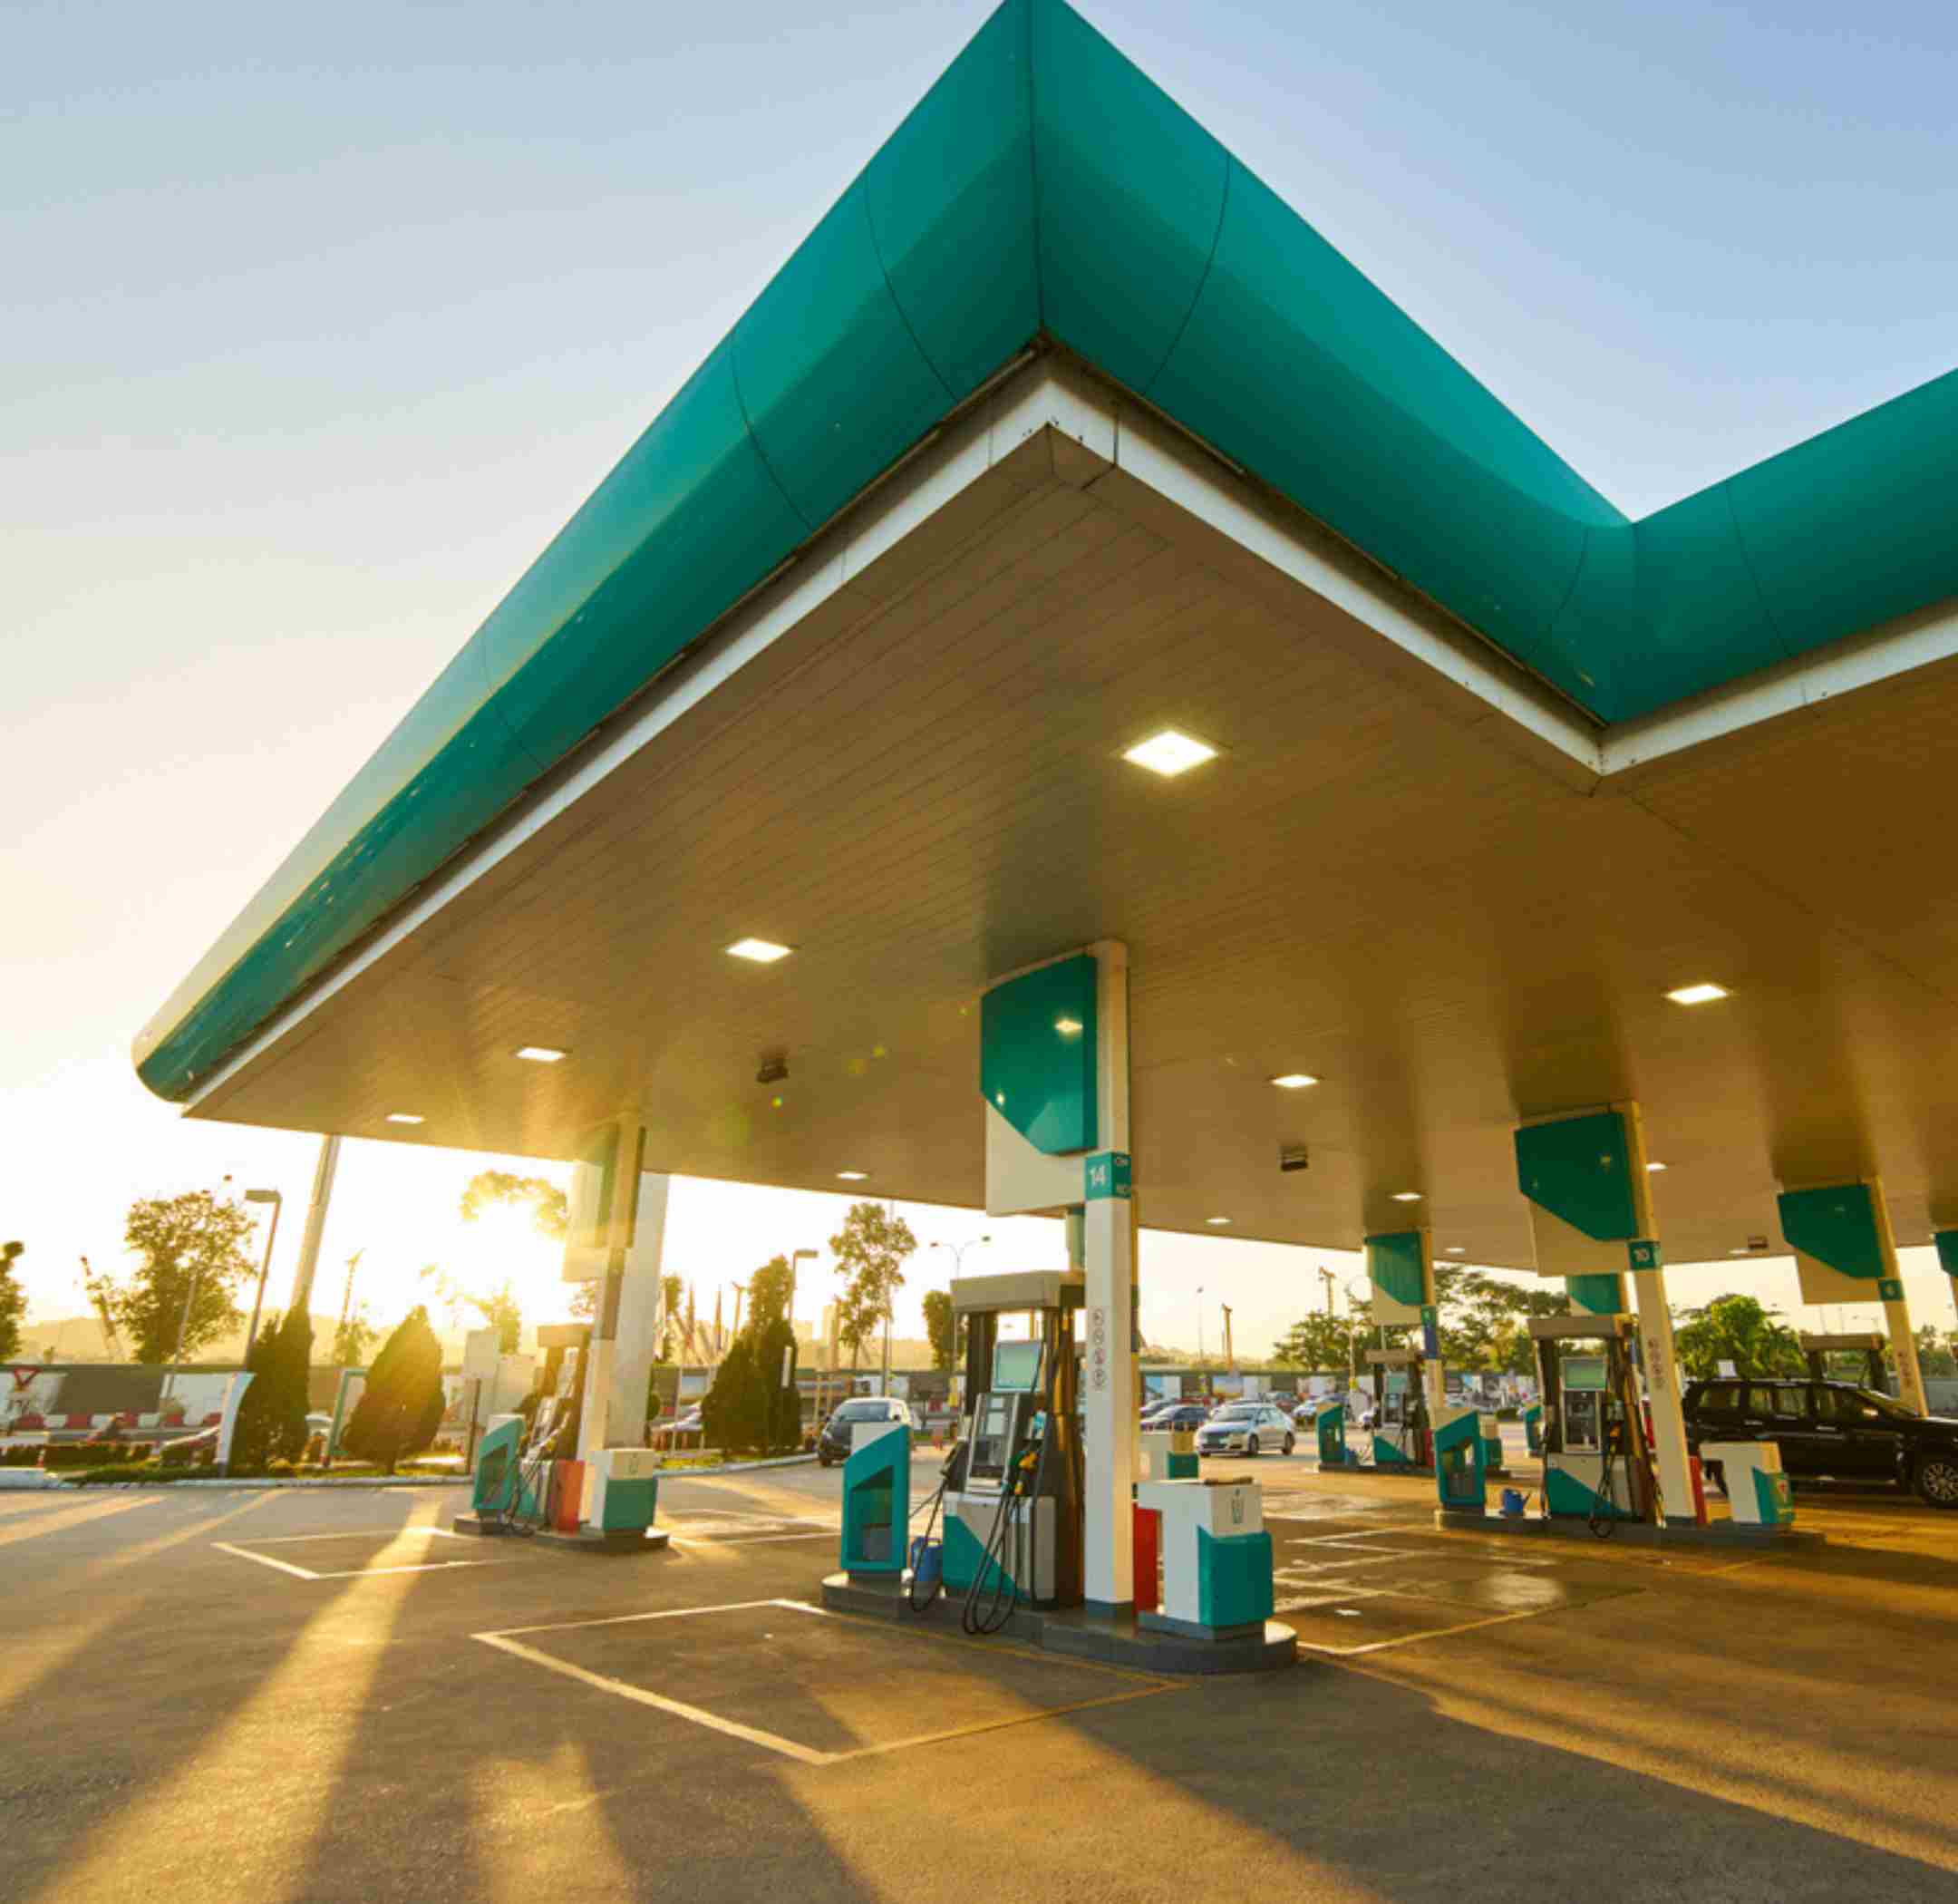 Large green and white petrol station and forecourt.